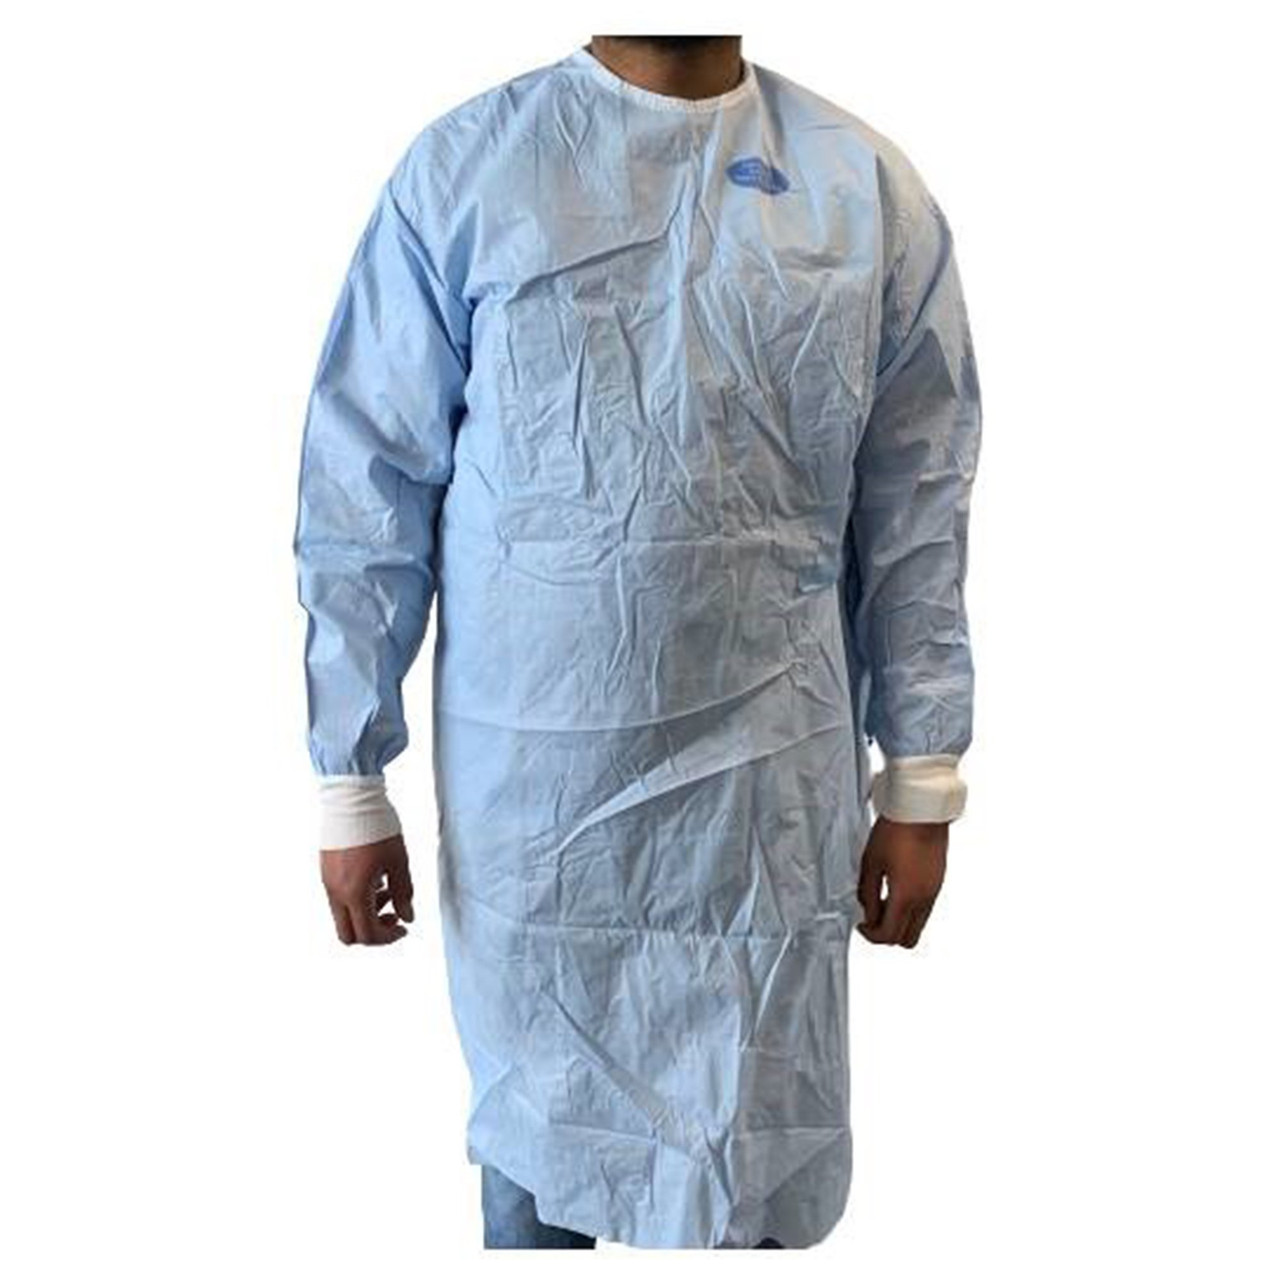 Medline Sirus Sterile Surgical Gown Blue S 30Ct